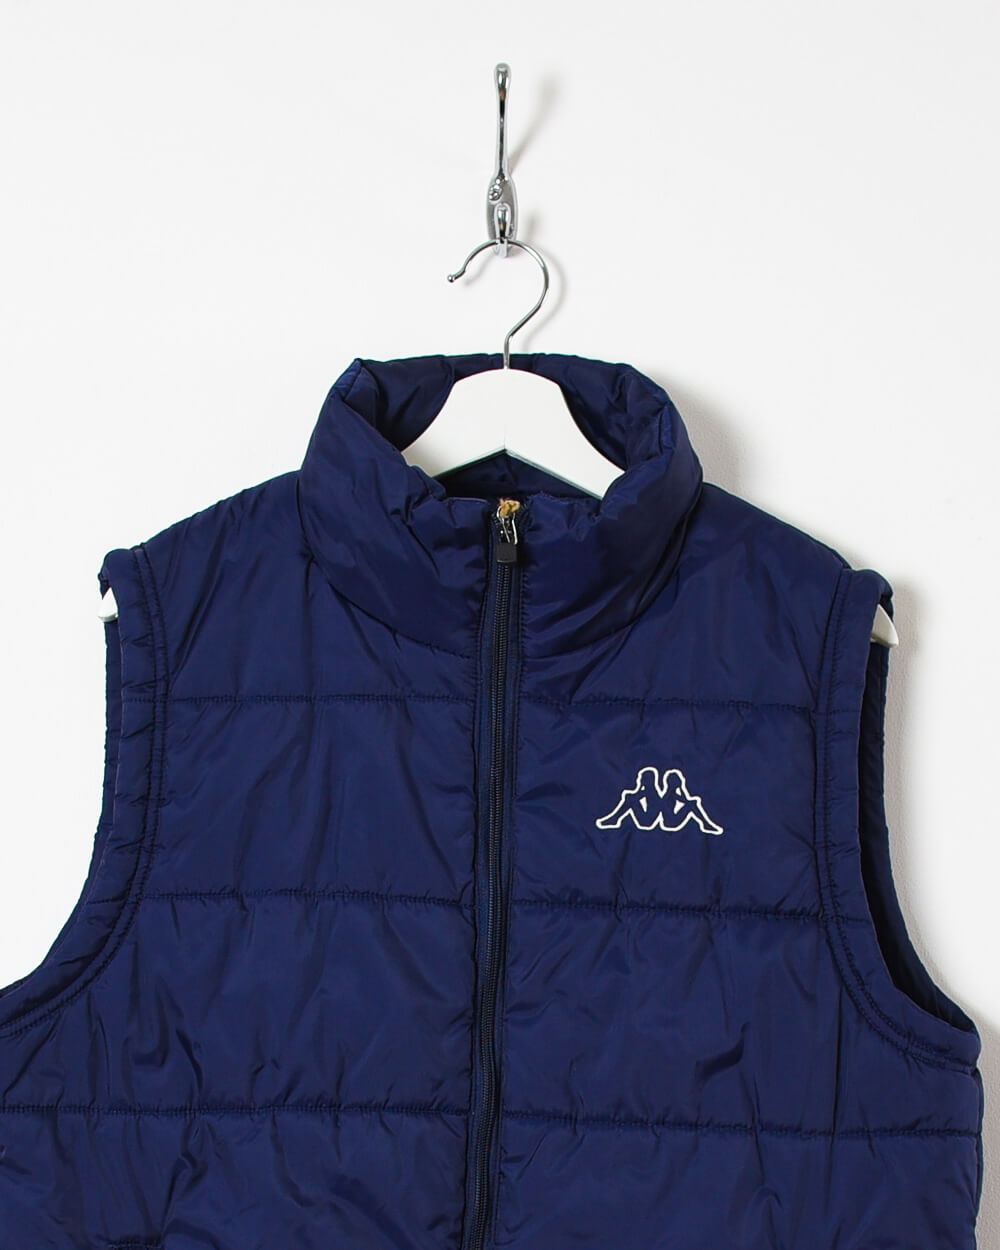 Kappa Down Gilet - Large - Domno Vintage 90s, 80s, 00s Retro and Vintage Clothing 